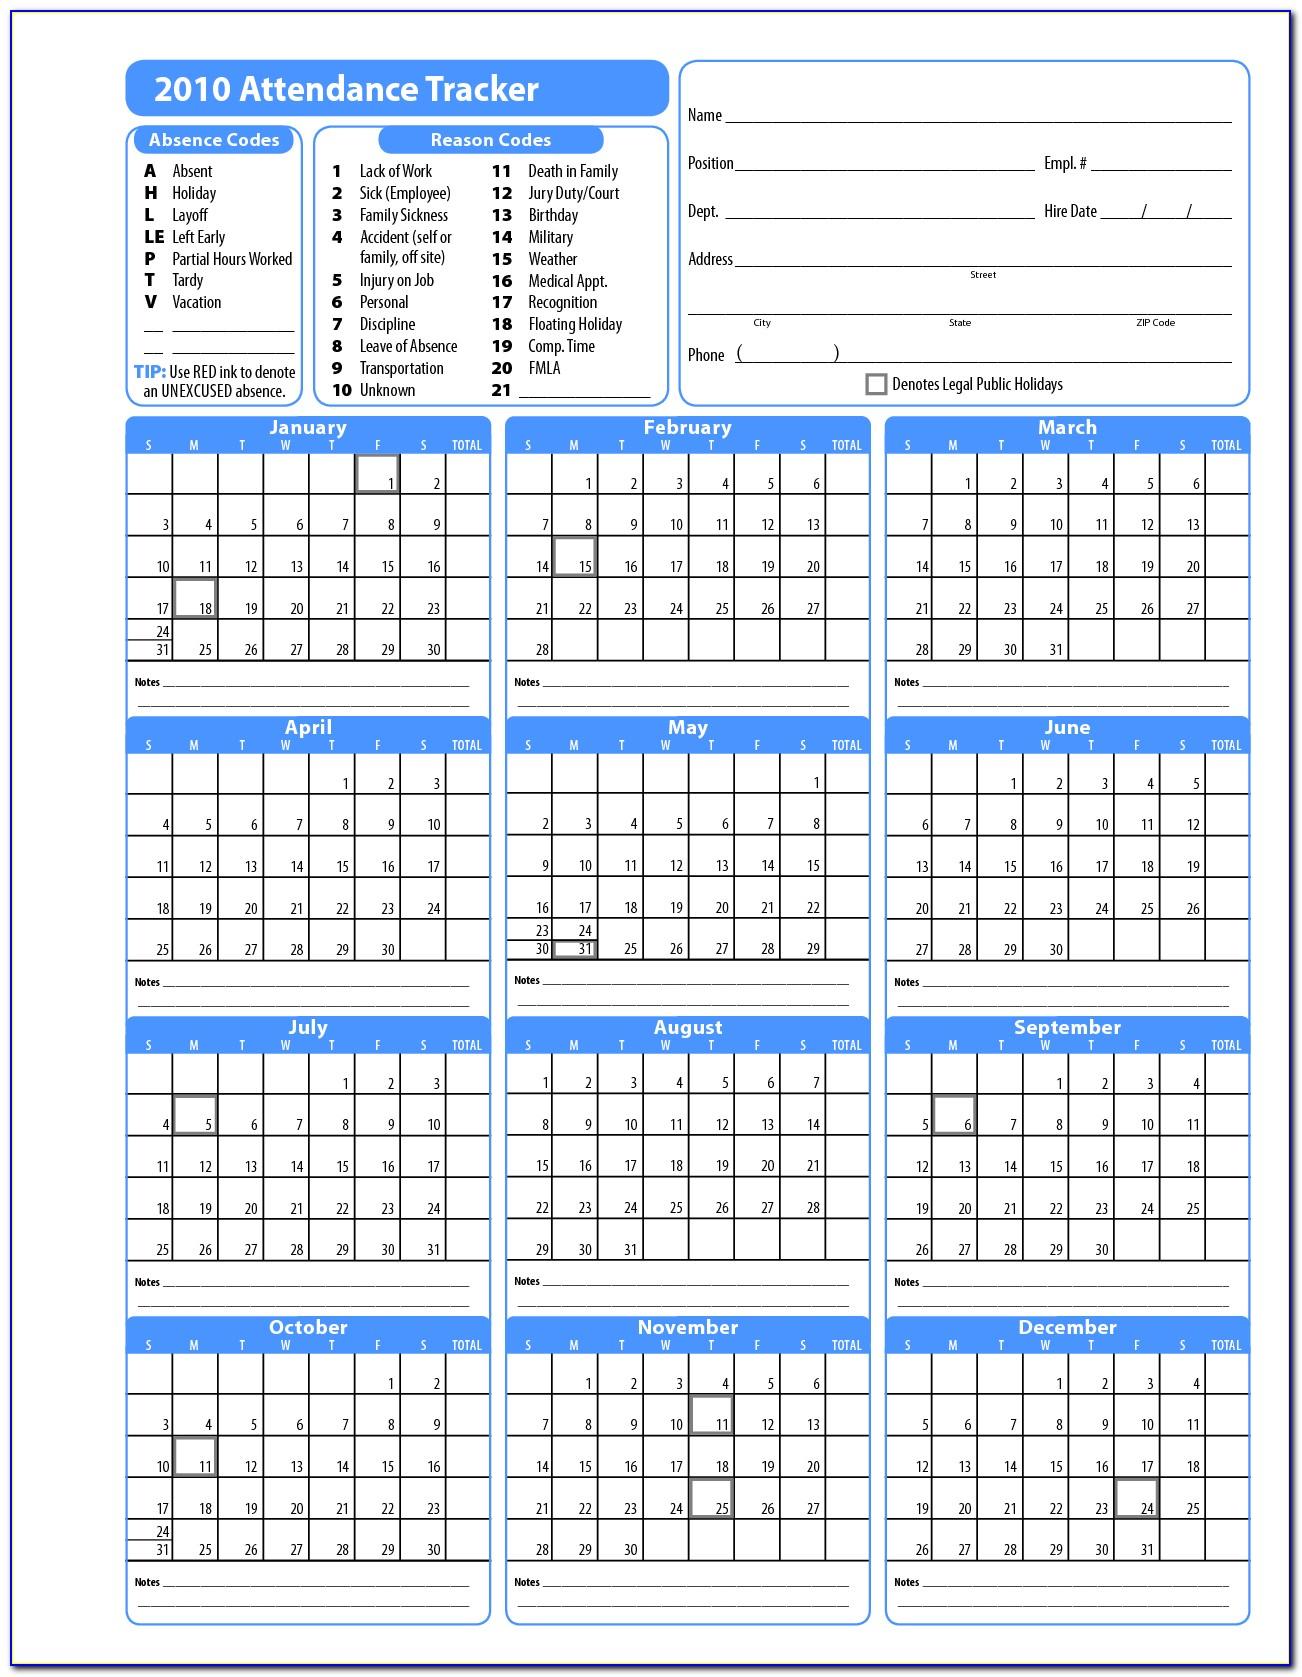 Monthly Training Plan Format